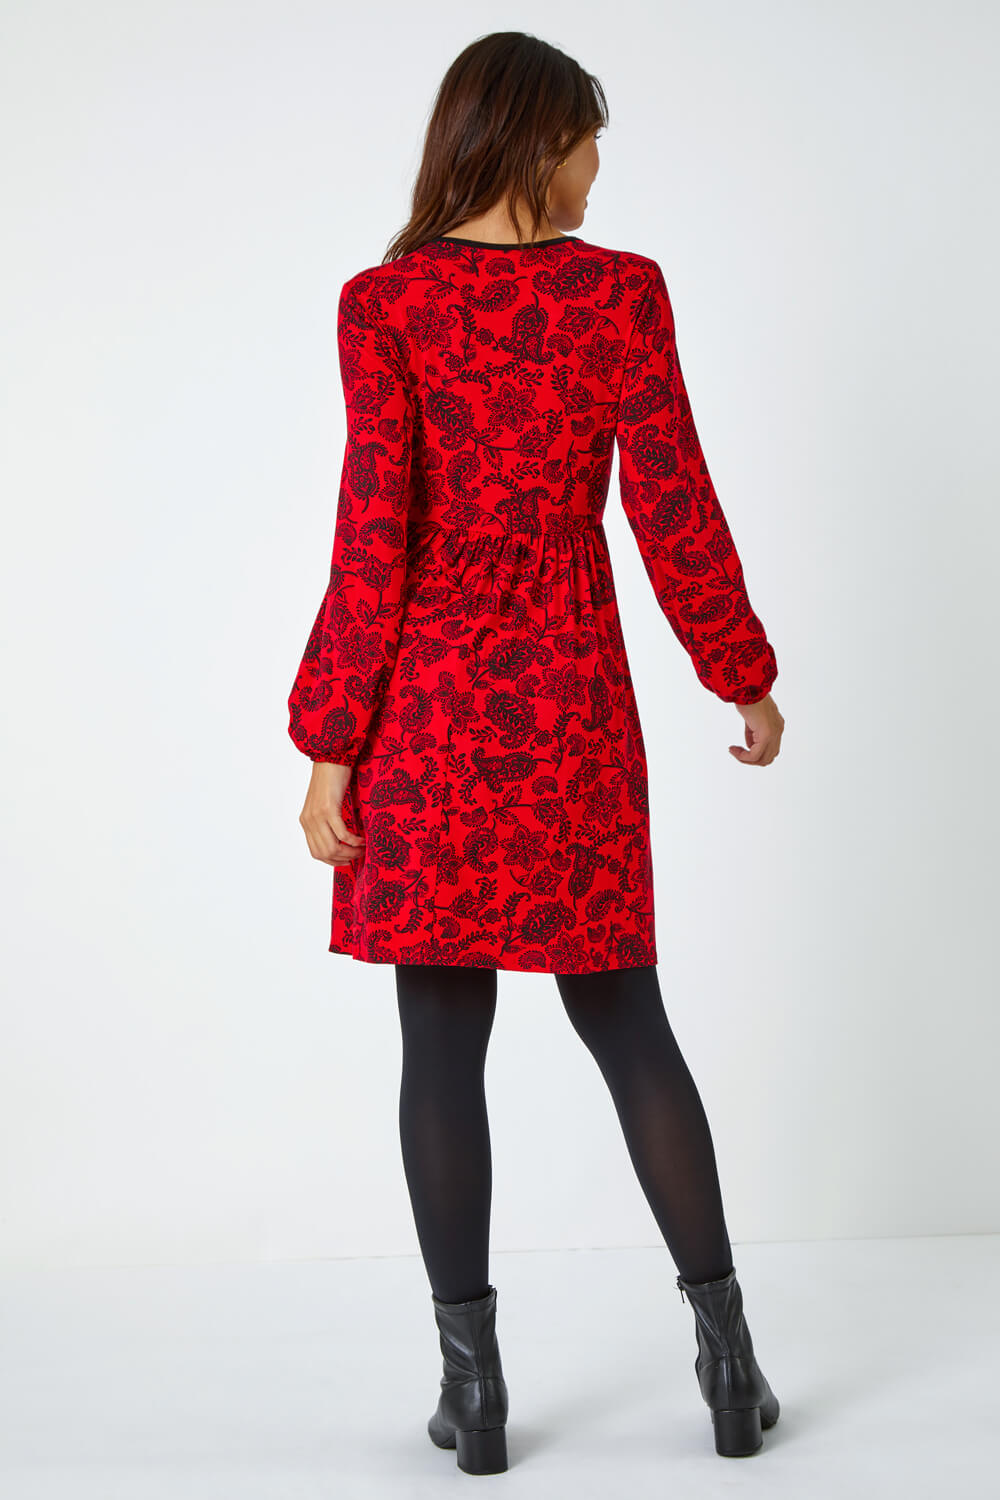 Red Floral Print Stretch Jersey Dress, Image 3 of 5